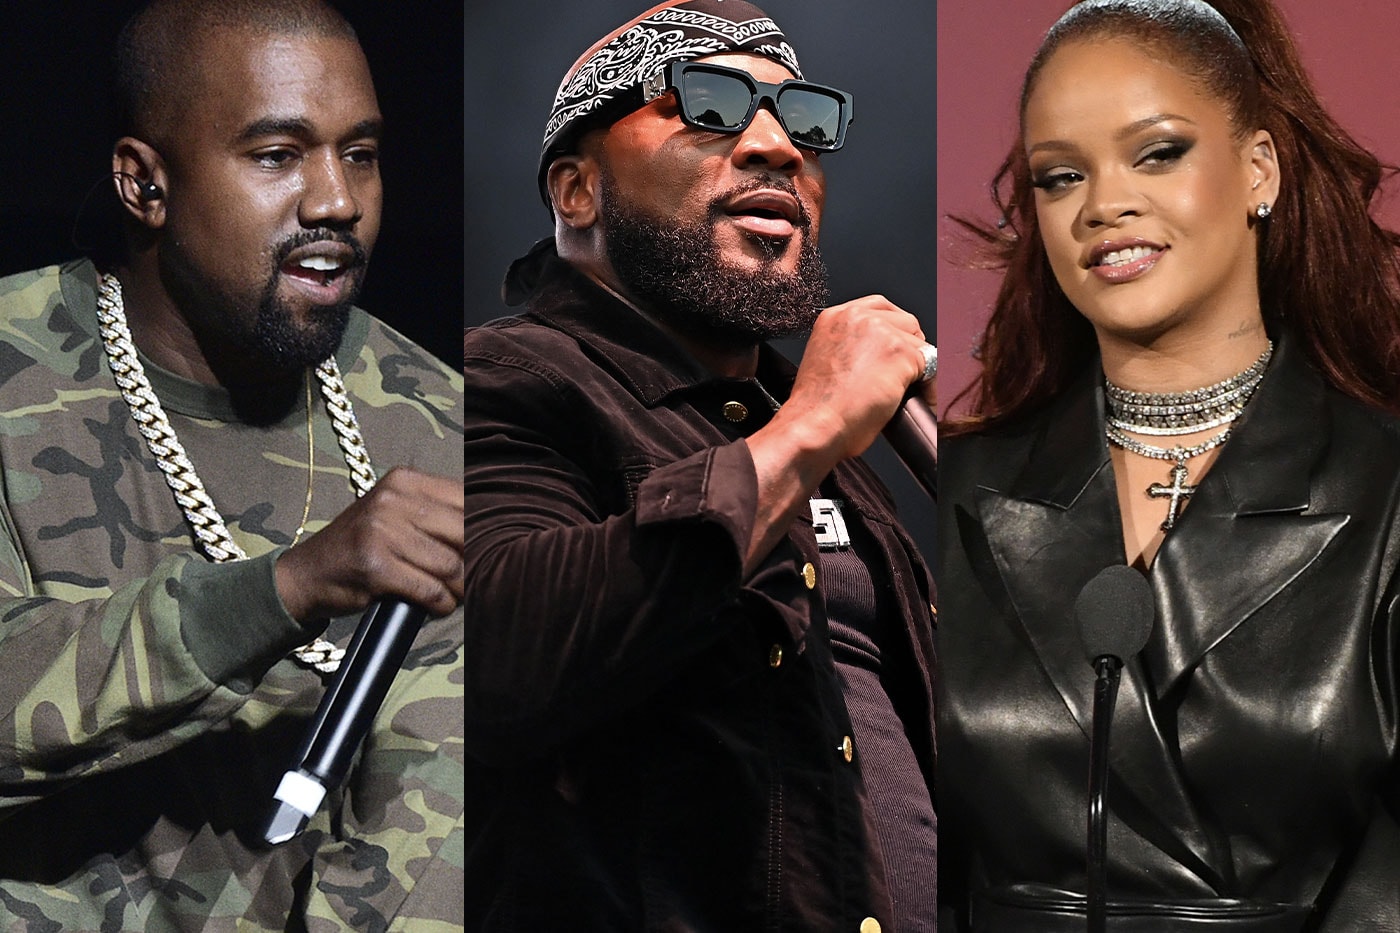 Jeezy Teases Featured Guests for dj drama gangsta grillz SnoFall Mixtape rihanna ye post malone